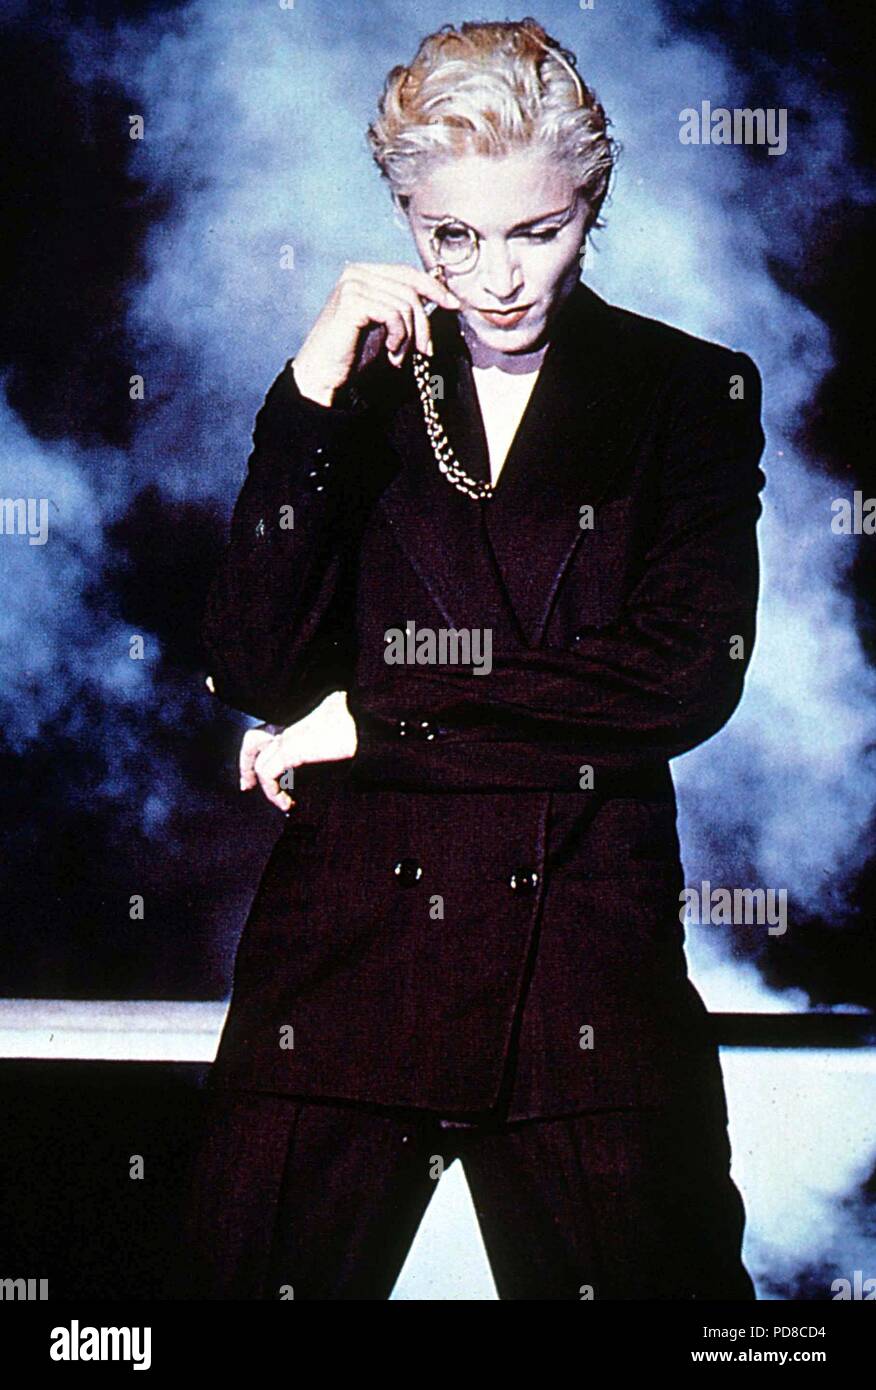 American singer, songwriter, actress, and businesswoman MADONNA turns 60 on August 16, 2018. PICTURED: A publicity still of MADONNA in the 1990's. Credit: Globe Photos/ZUMAPRESS.com/Alamy Live News Stock Photo